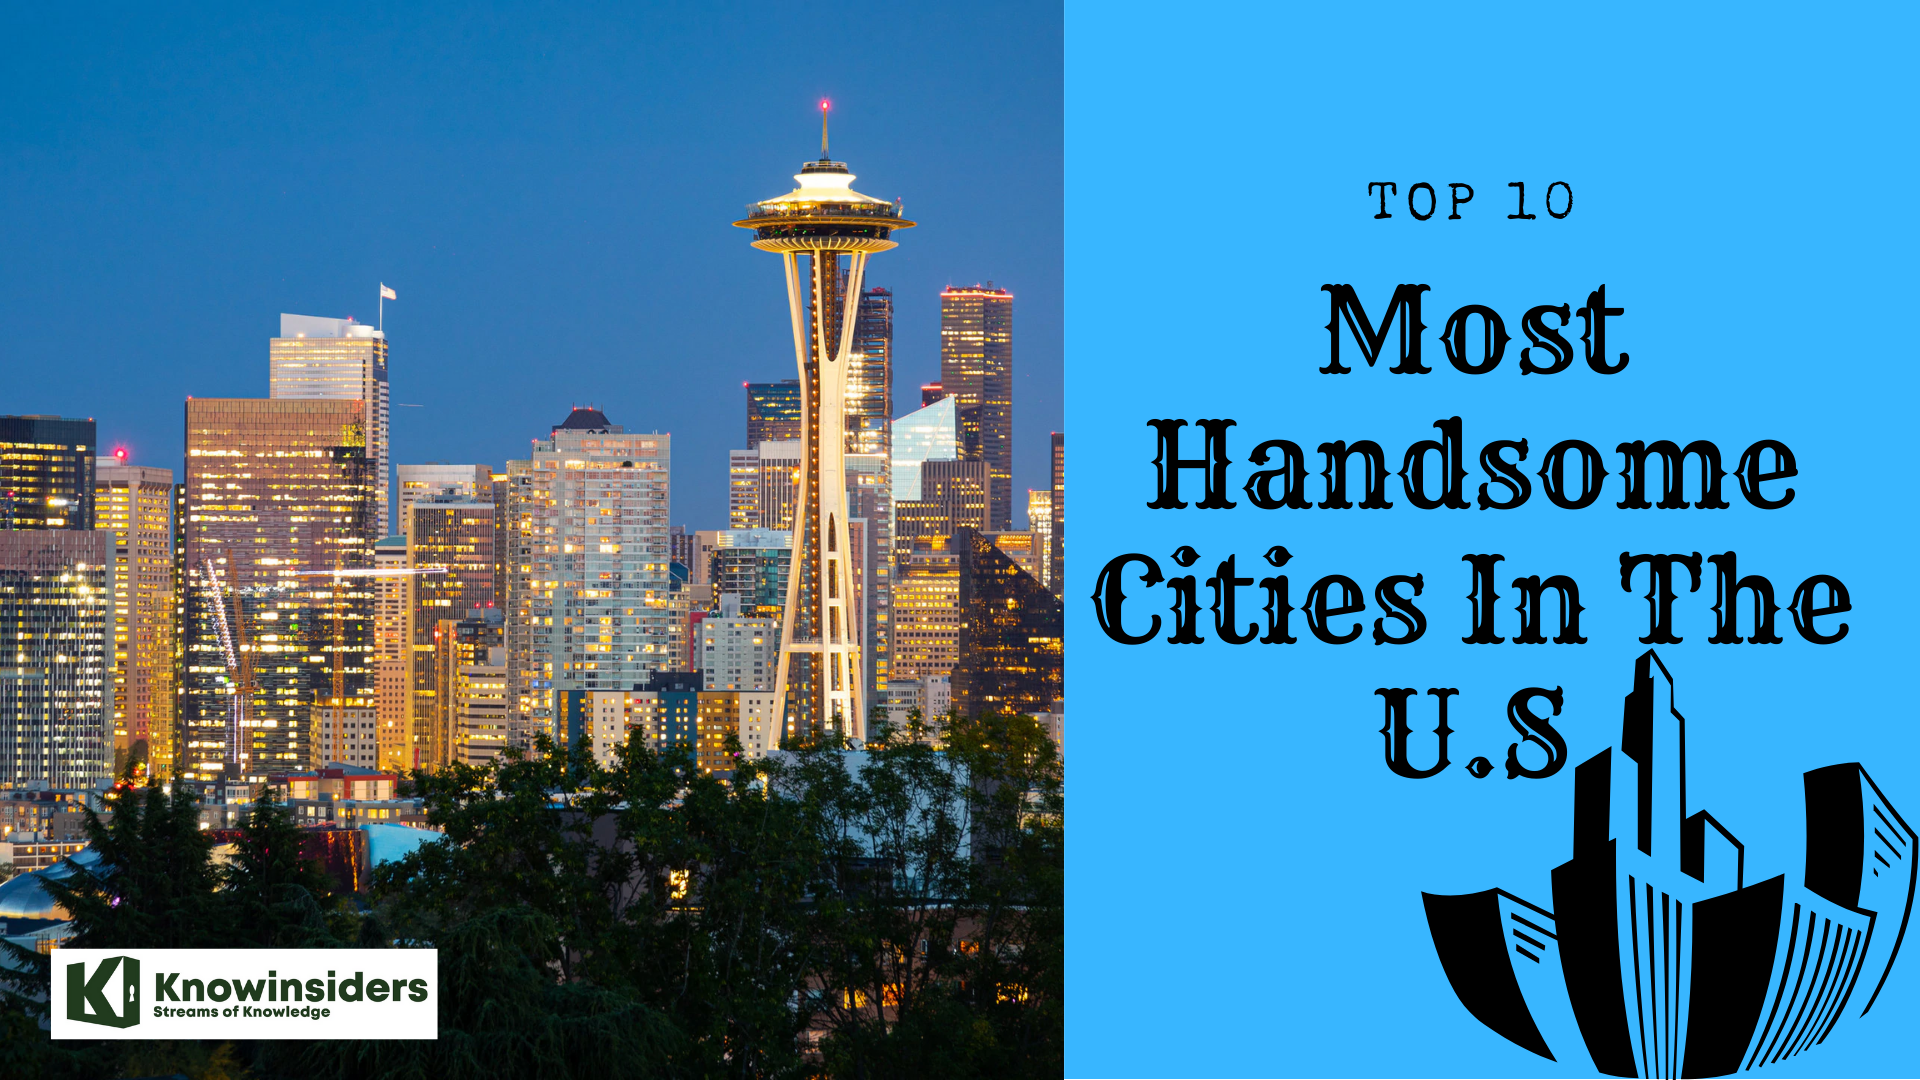 Top 10 Cities With the Most Handsome Men in the U.S